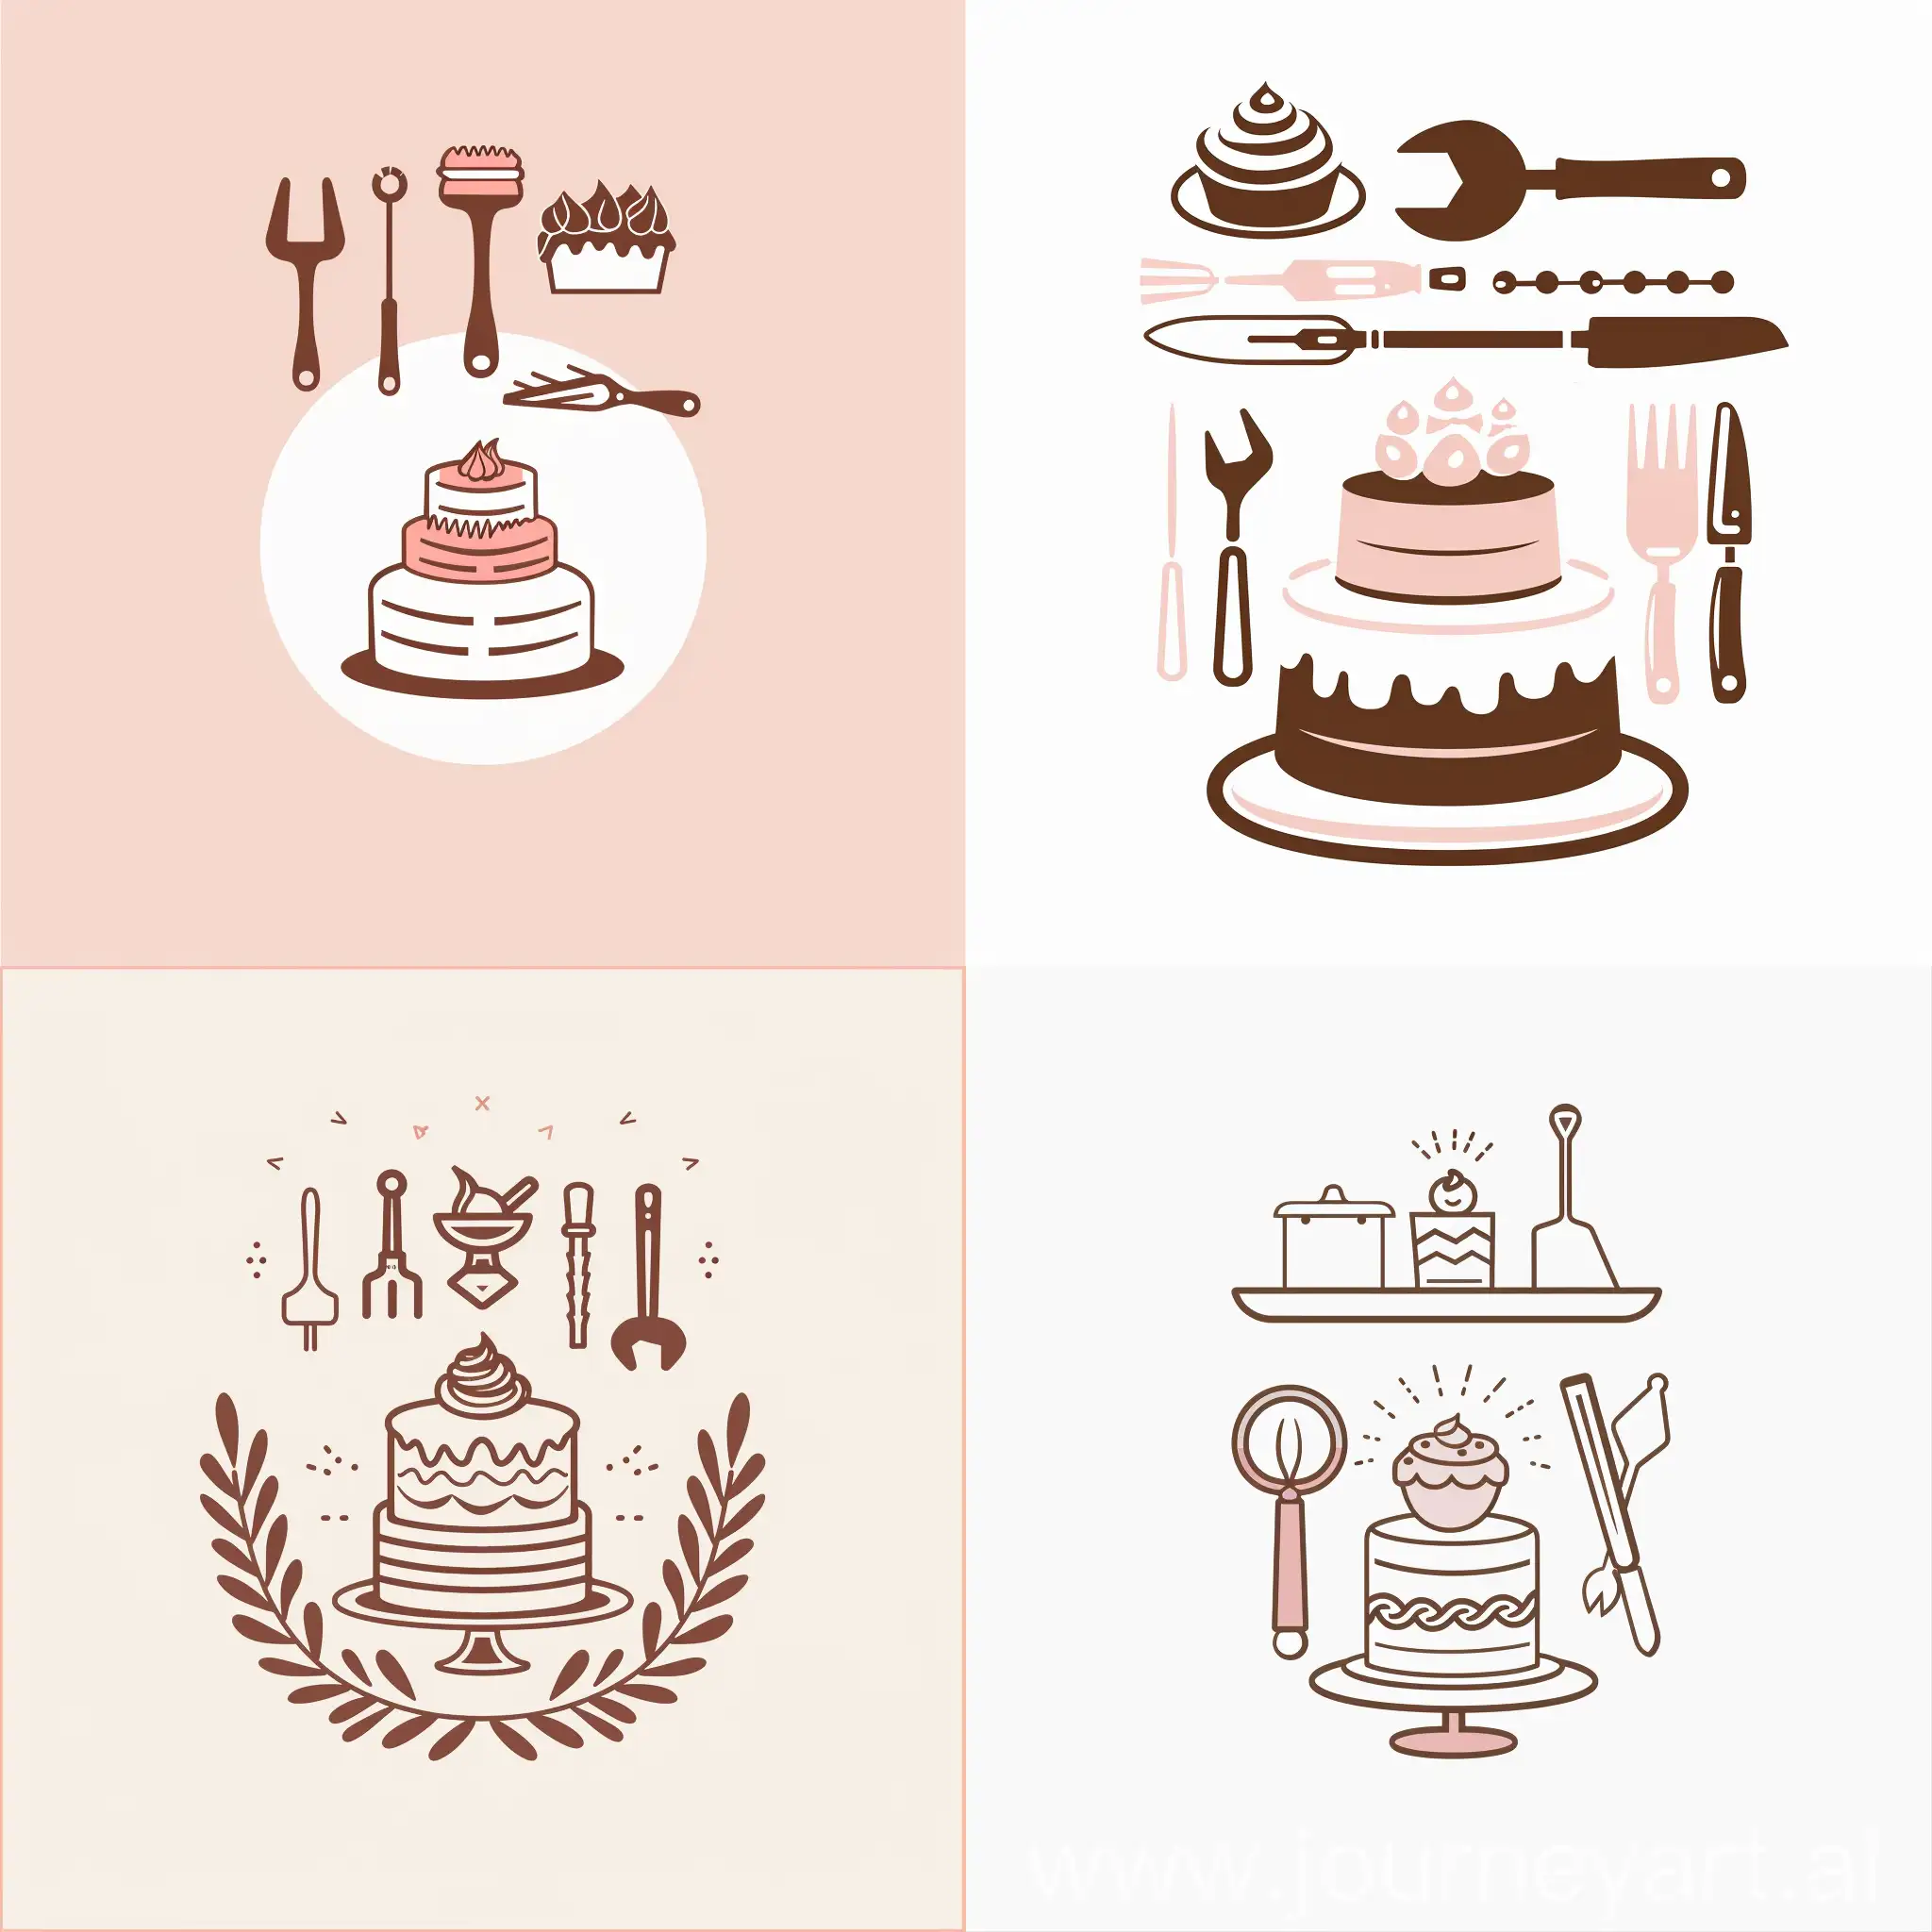  logo minimalist whith a cake in center, with bakery tools above, everthing centered, white pink and clean brown tones, vector, png, svg